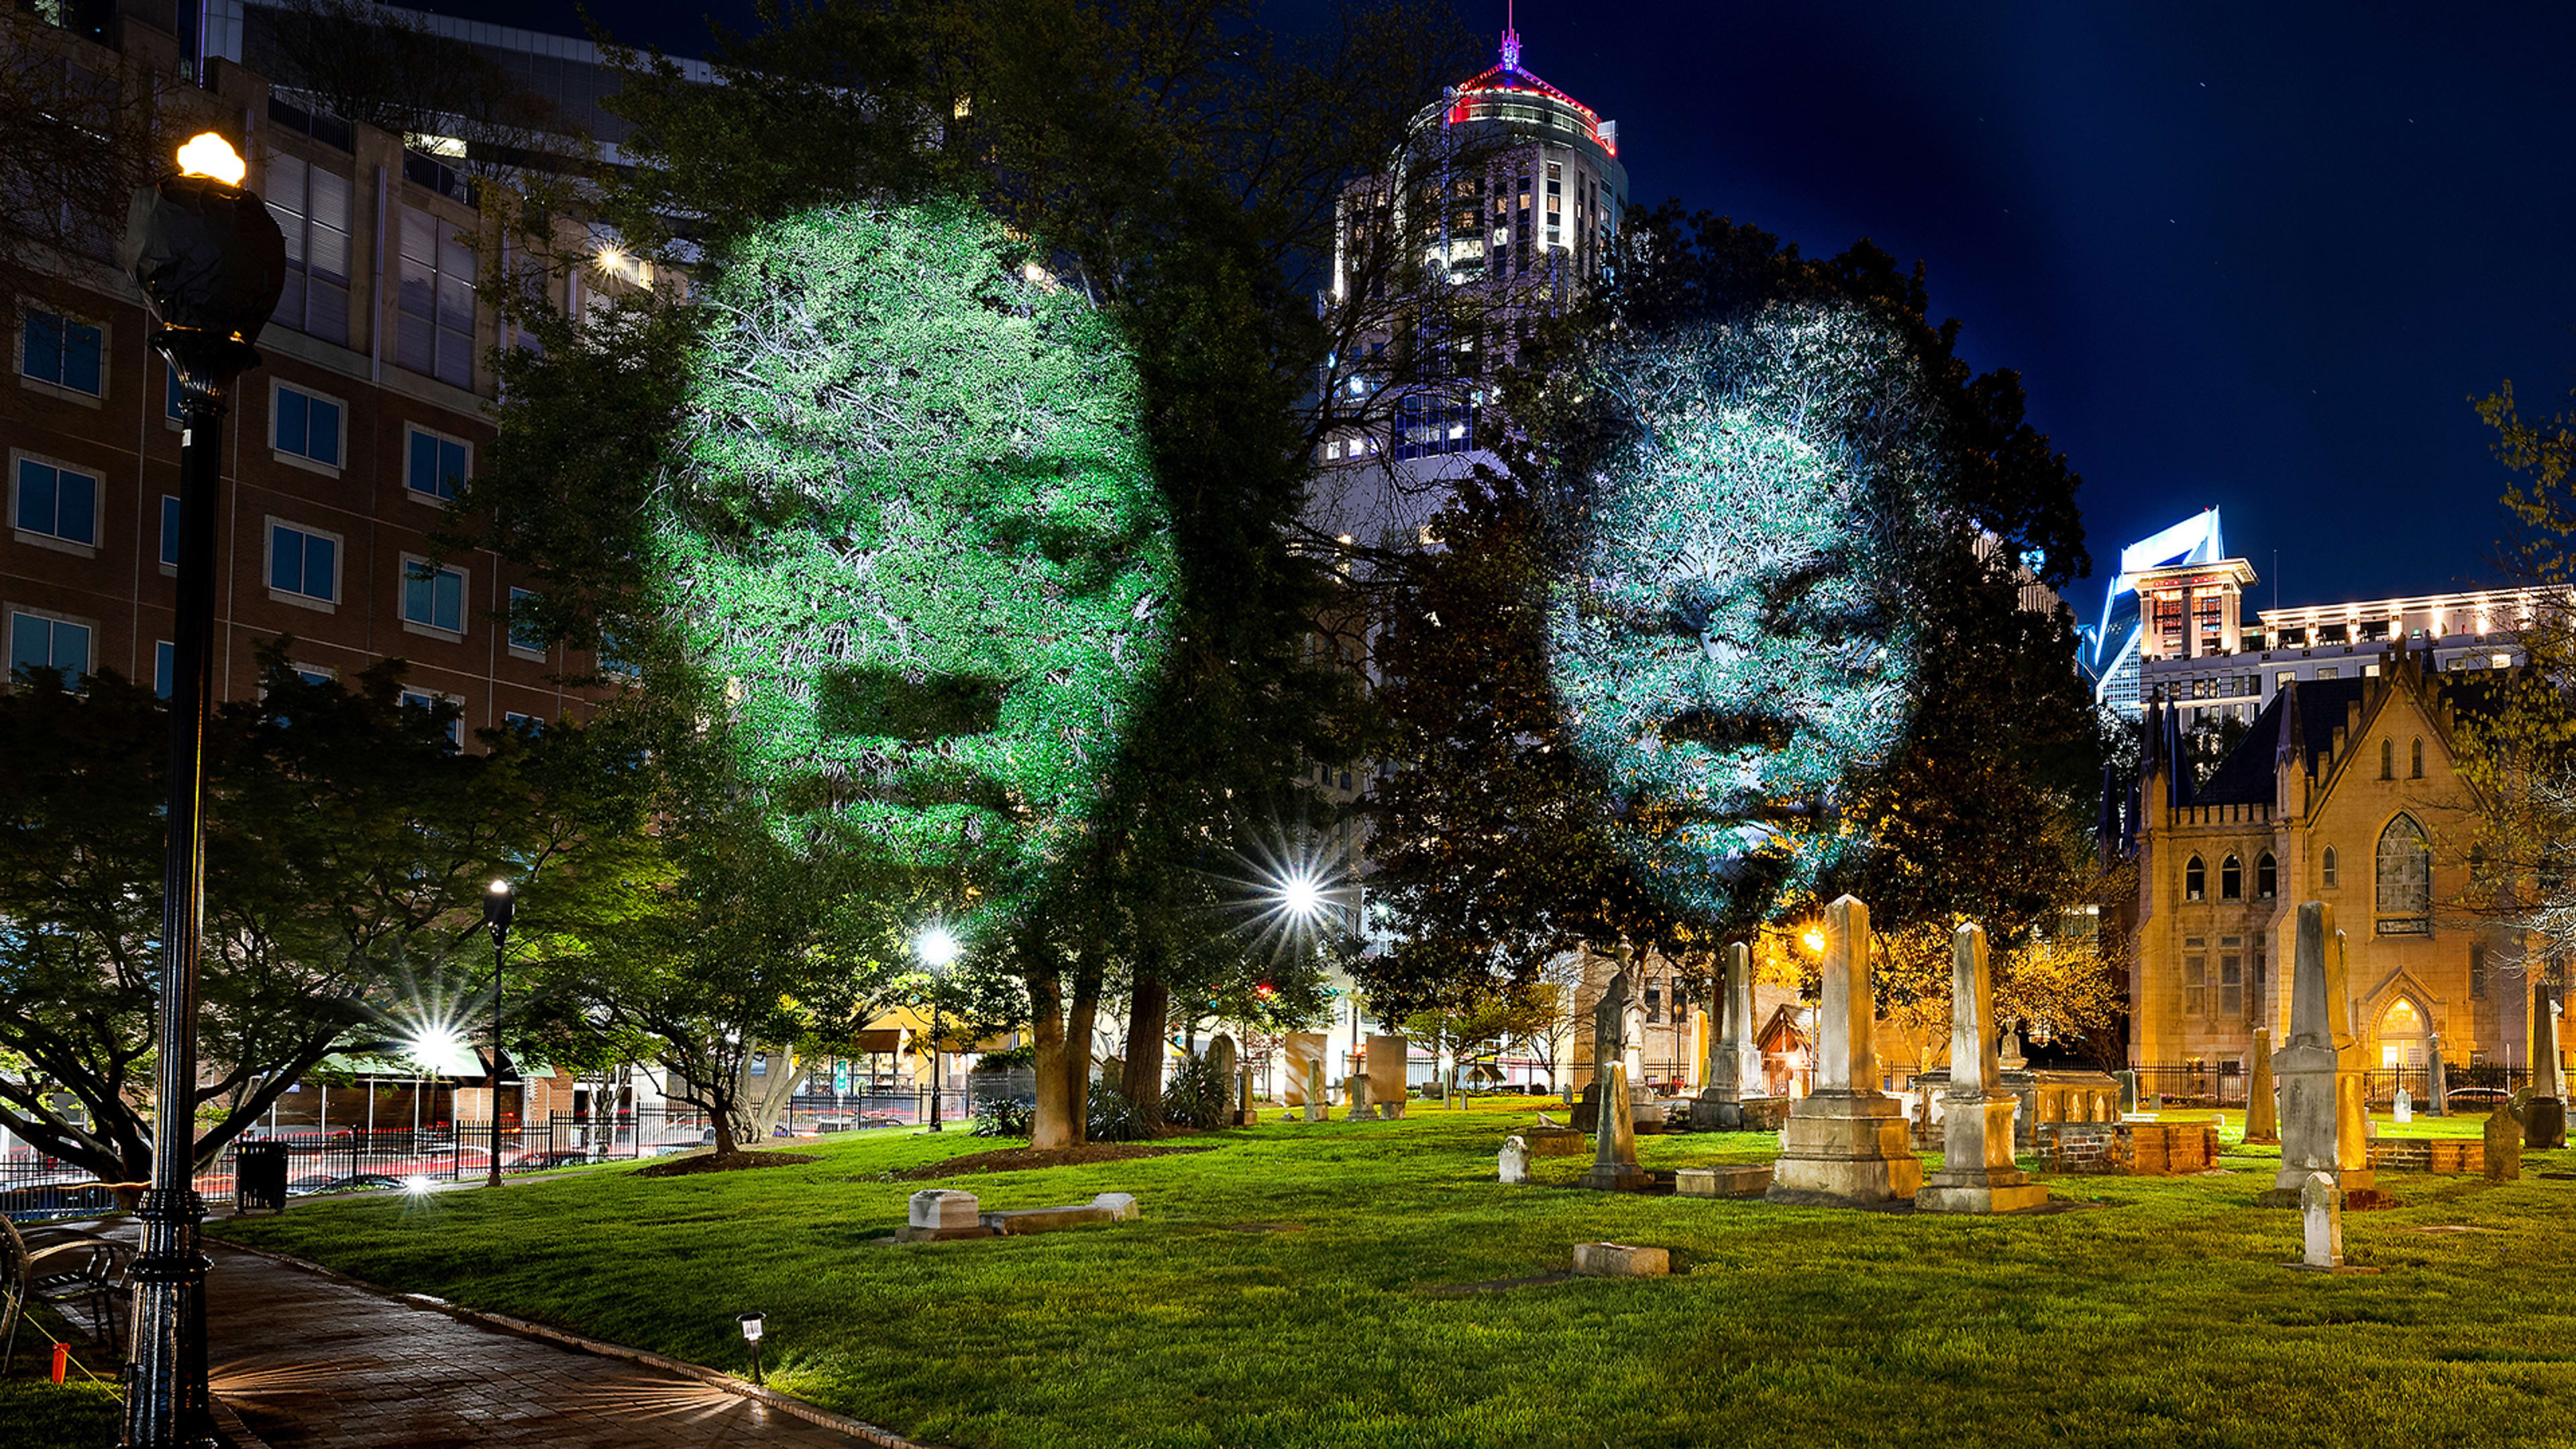 These haunting, moving monuments honor enslaved people in Charlotte, North Carolina